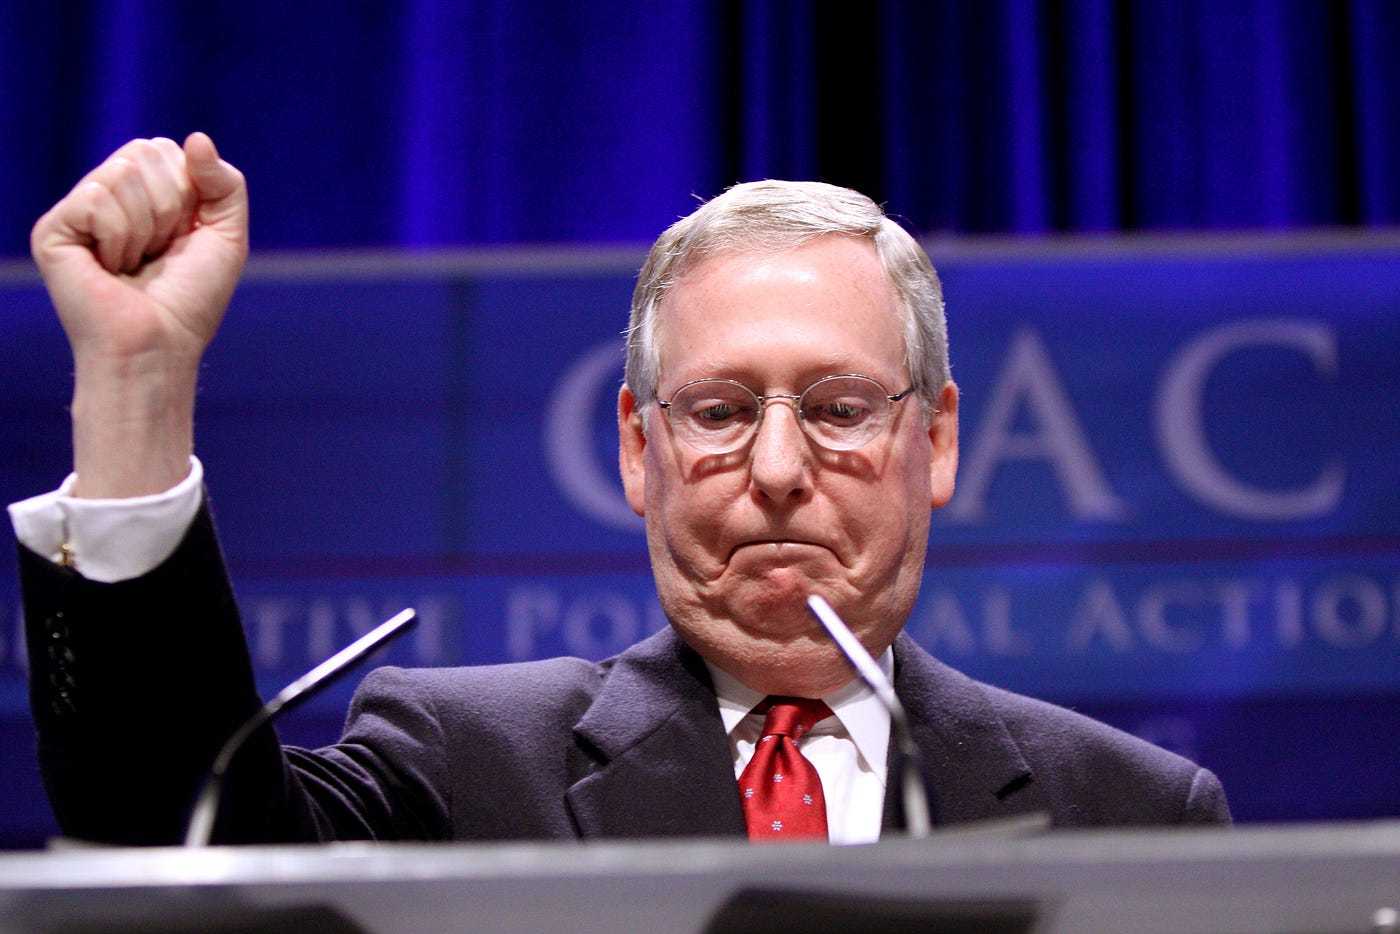 “Mitch McConnell” by Gage Skidmore, CC BY-SA 2.0. Taken at CPAC 2011.